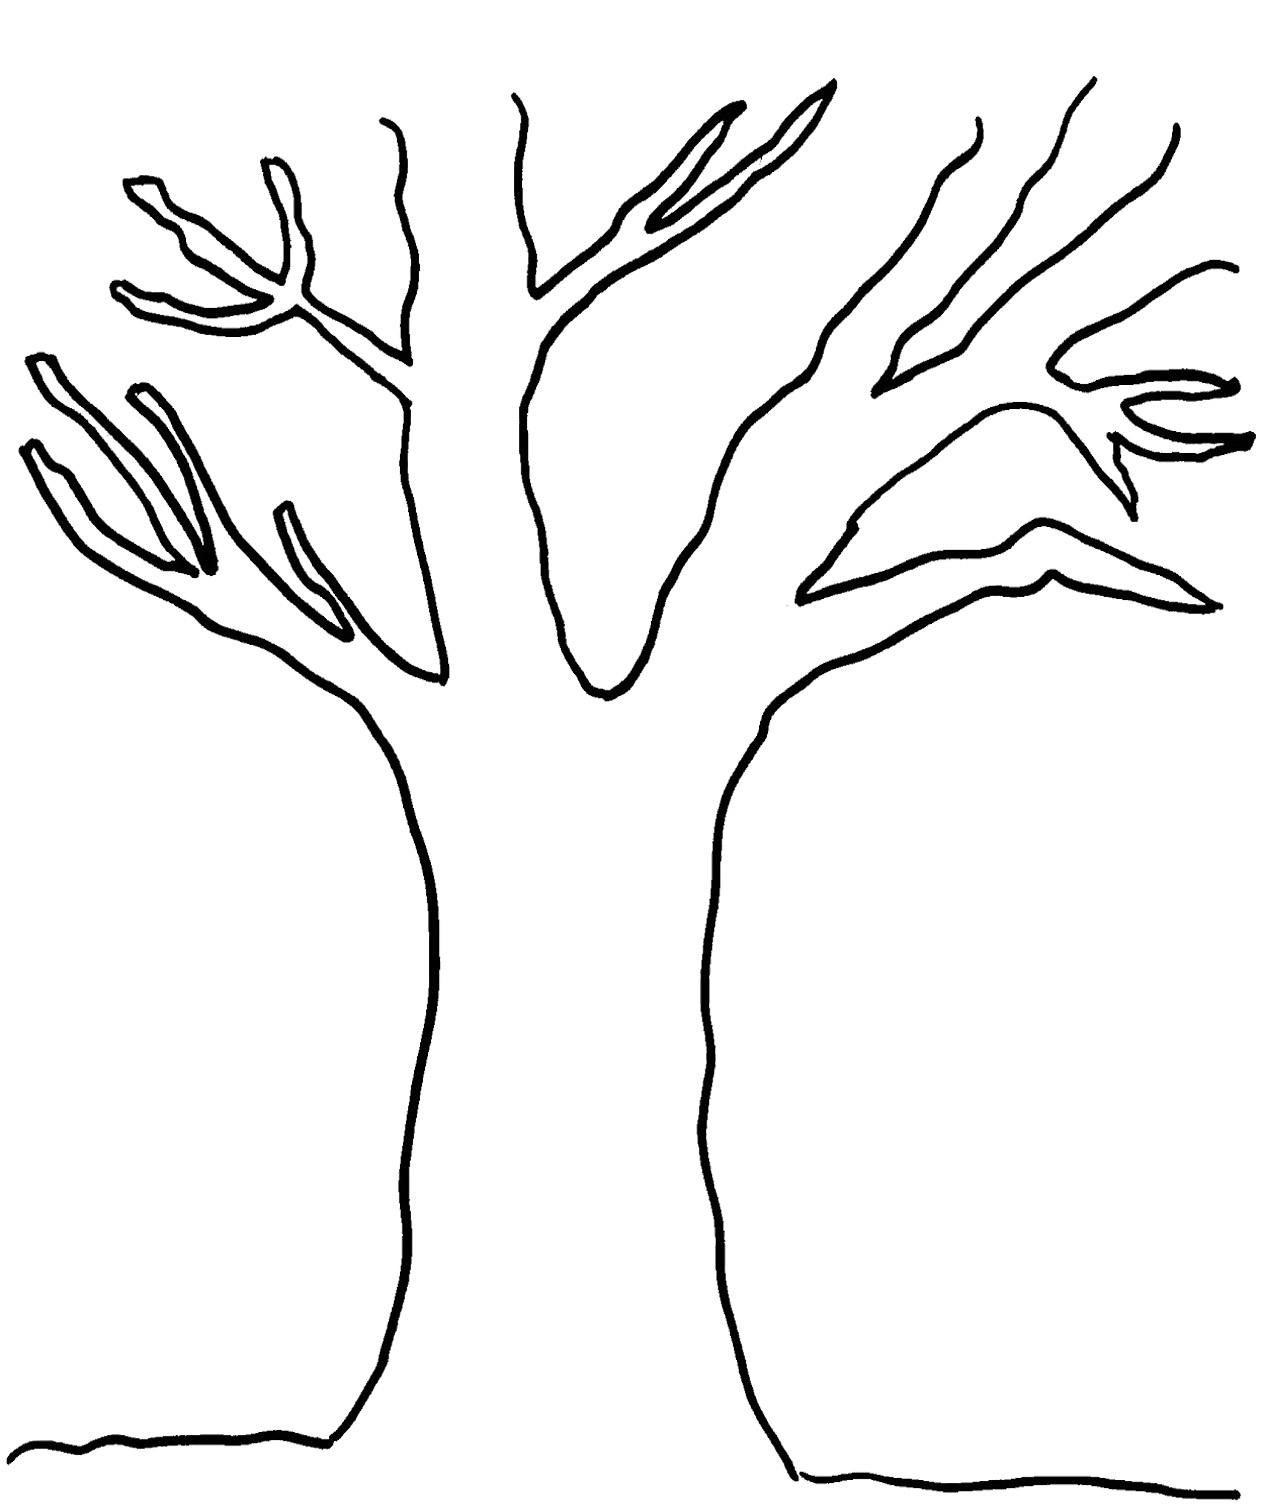 clip art tree with no leaves - photo #44